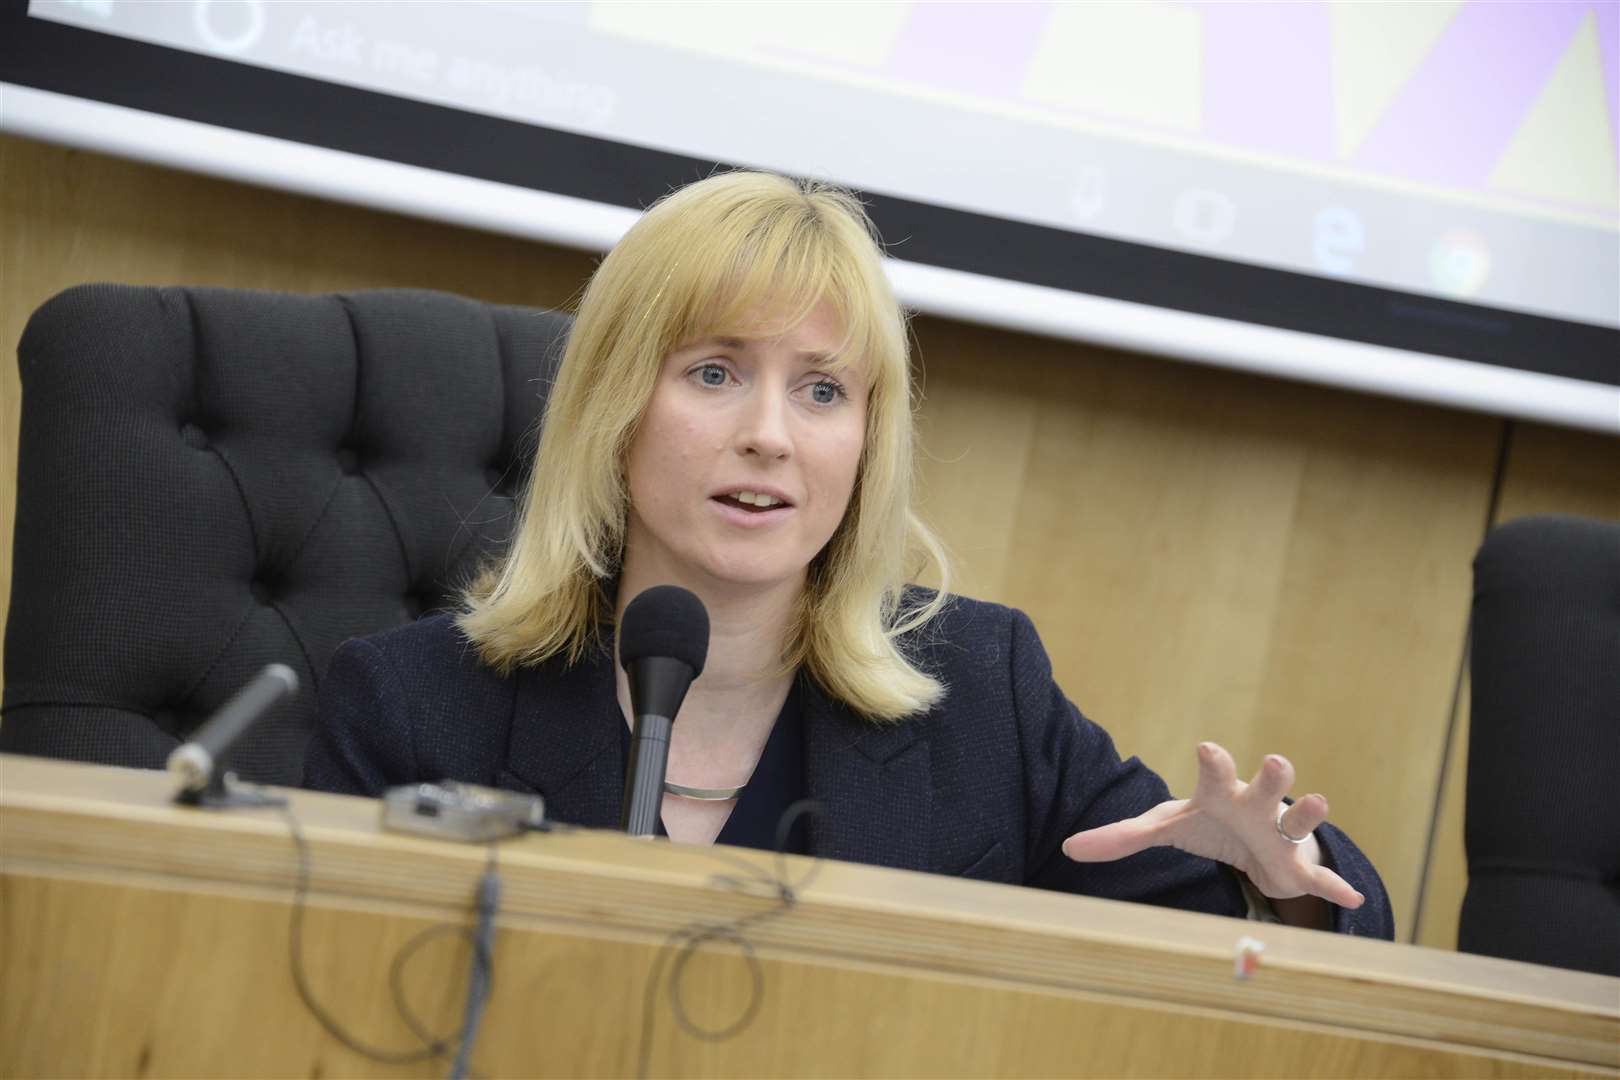 Rosie Duffield raised the issue with the Prime Minister